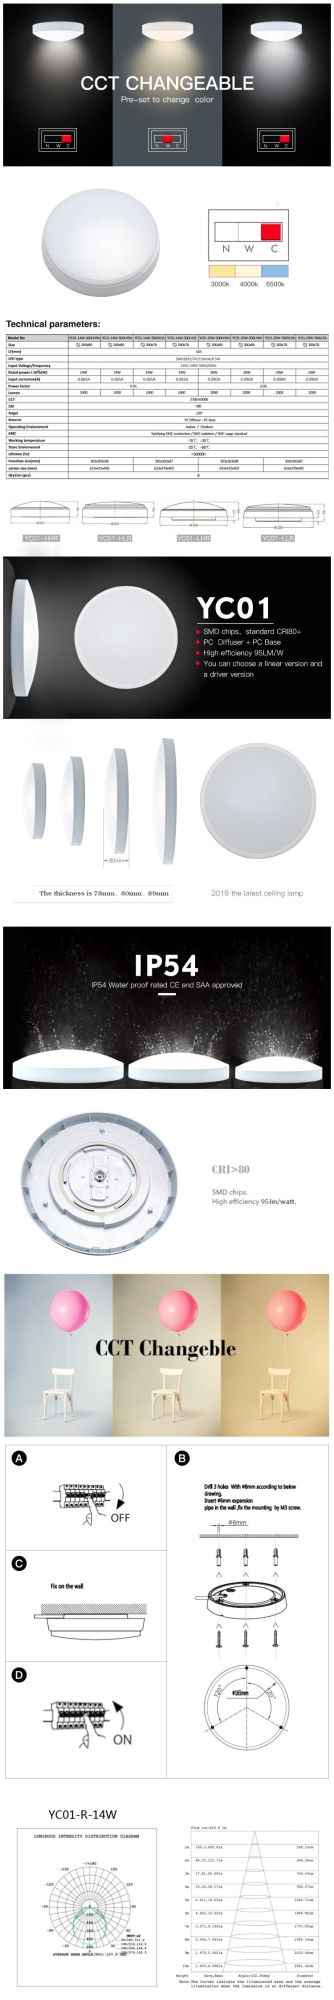 Low Power 14W China Wide Angle Round Mini LED Ceiling Light